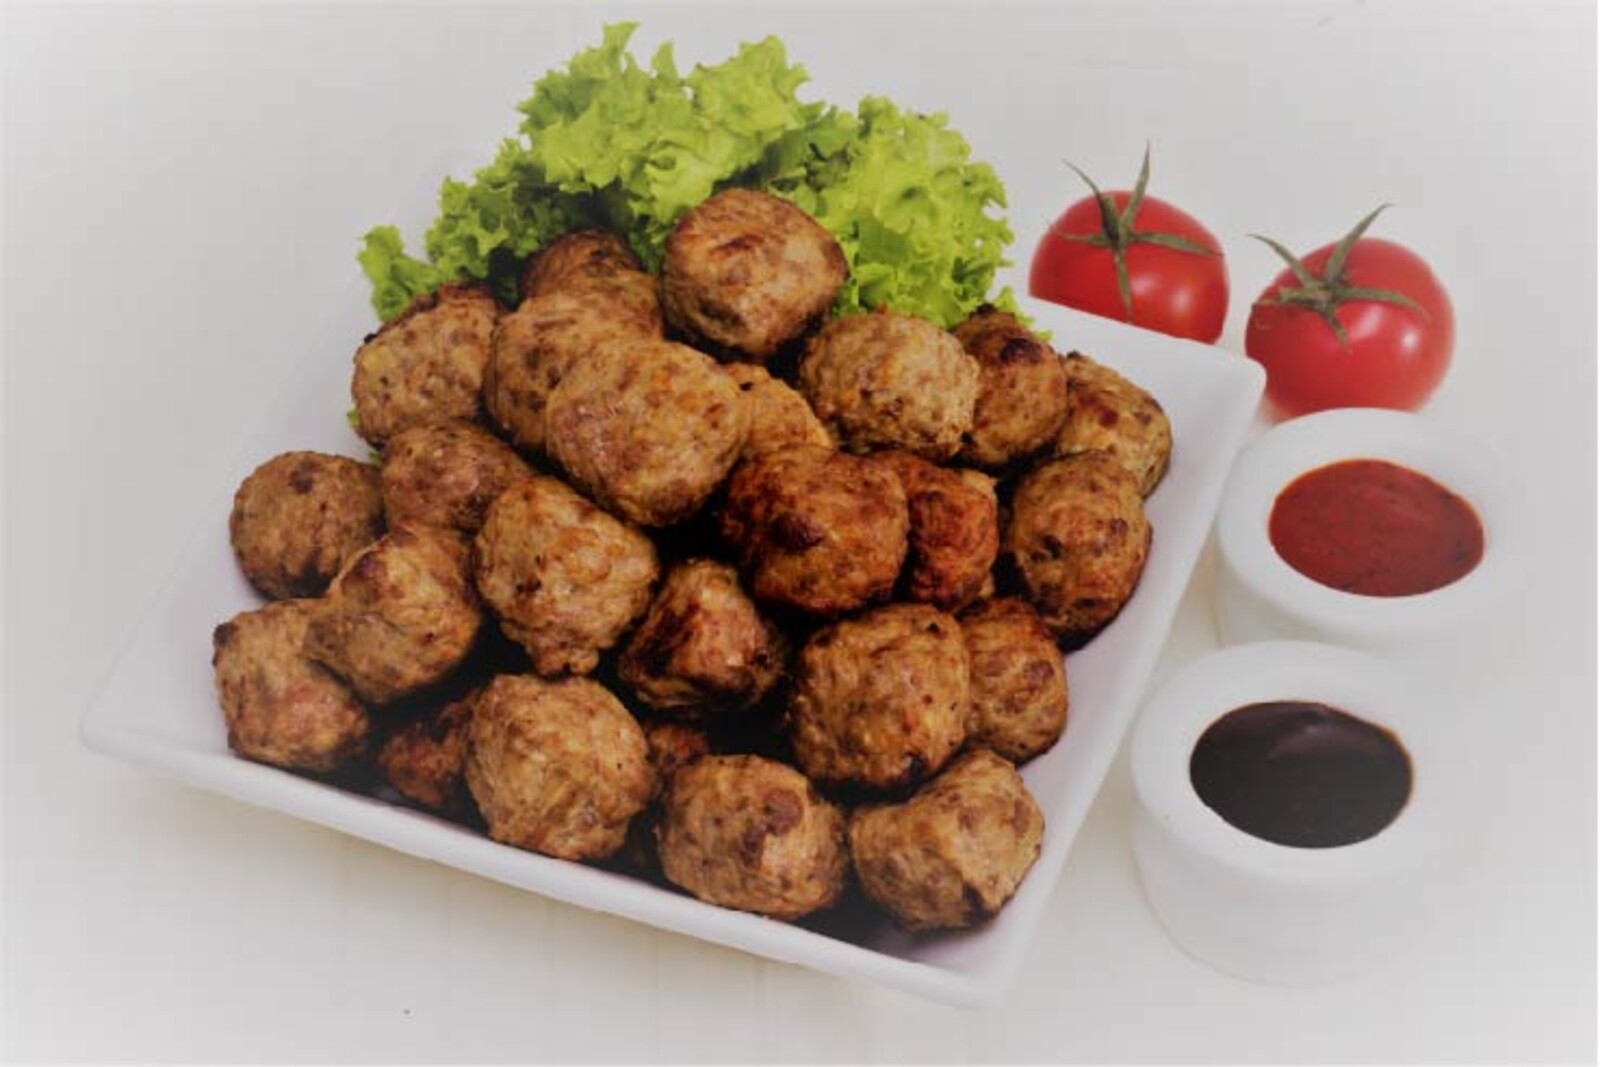 Cavos Products Beef Meatball 